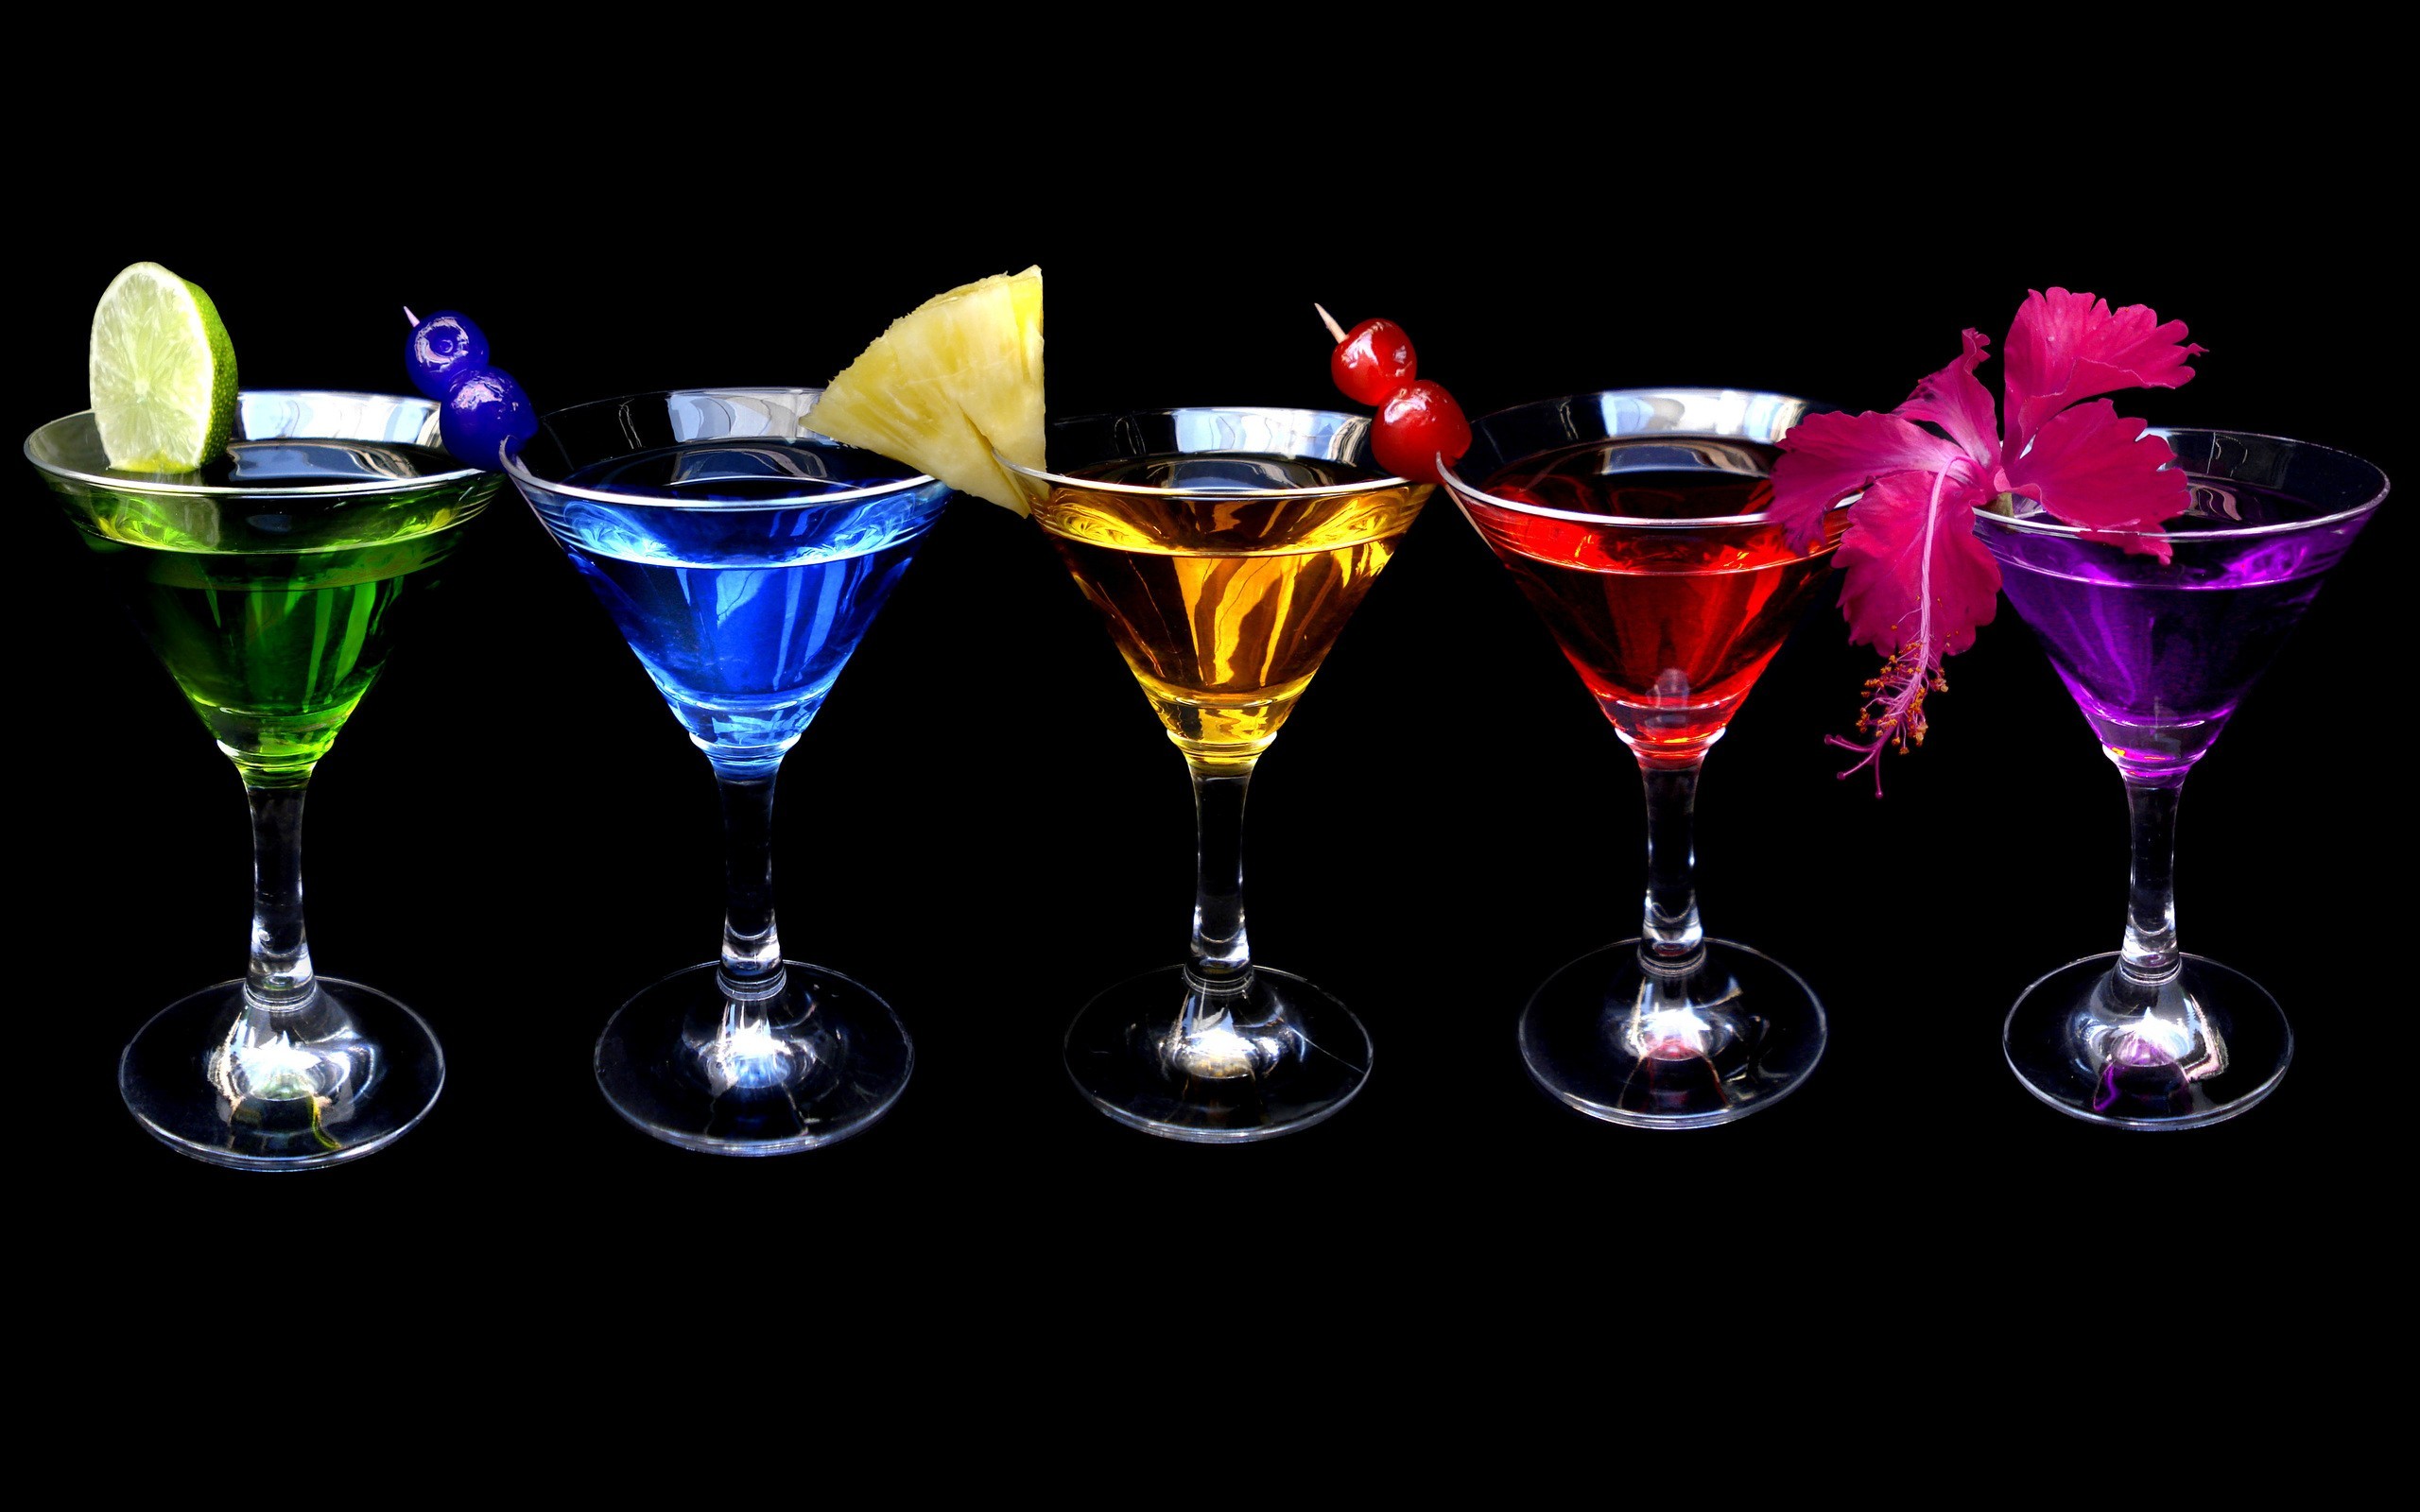 Cocktails Colorful Fruit Drinking Glass Black Background Drink Black Pineapples Cherries Food Limes  2560x1600